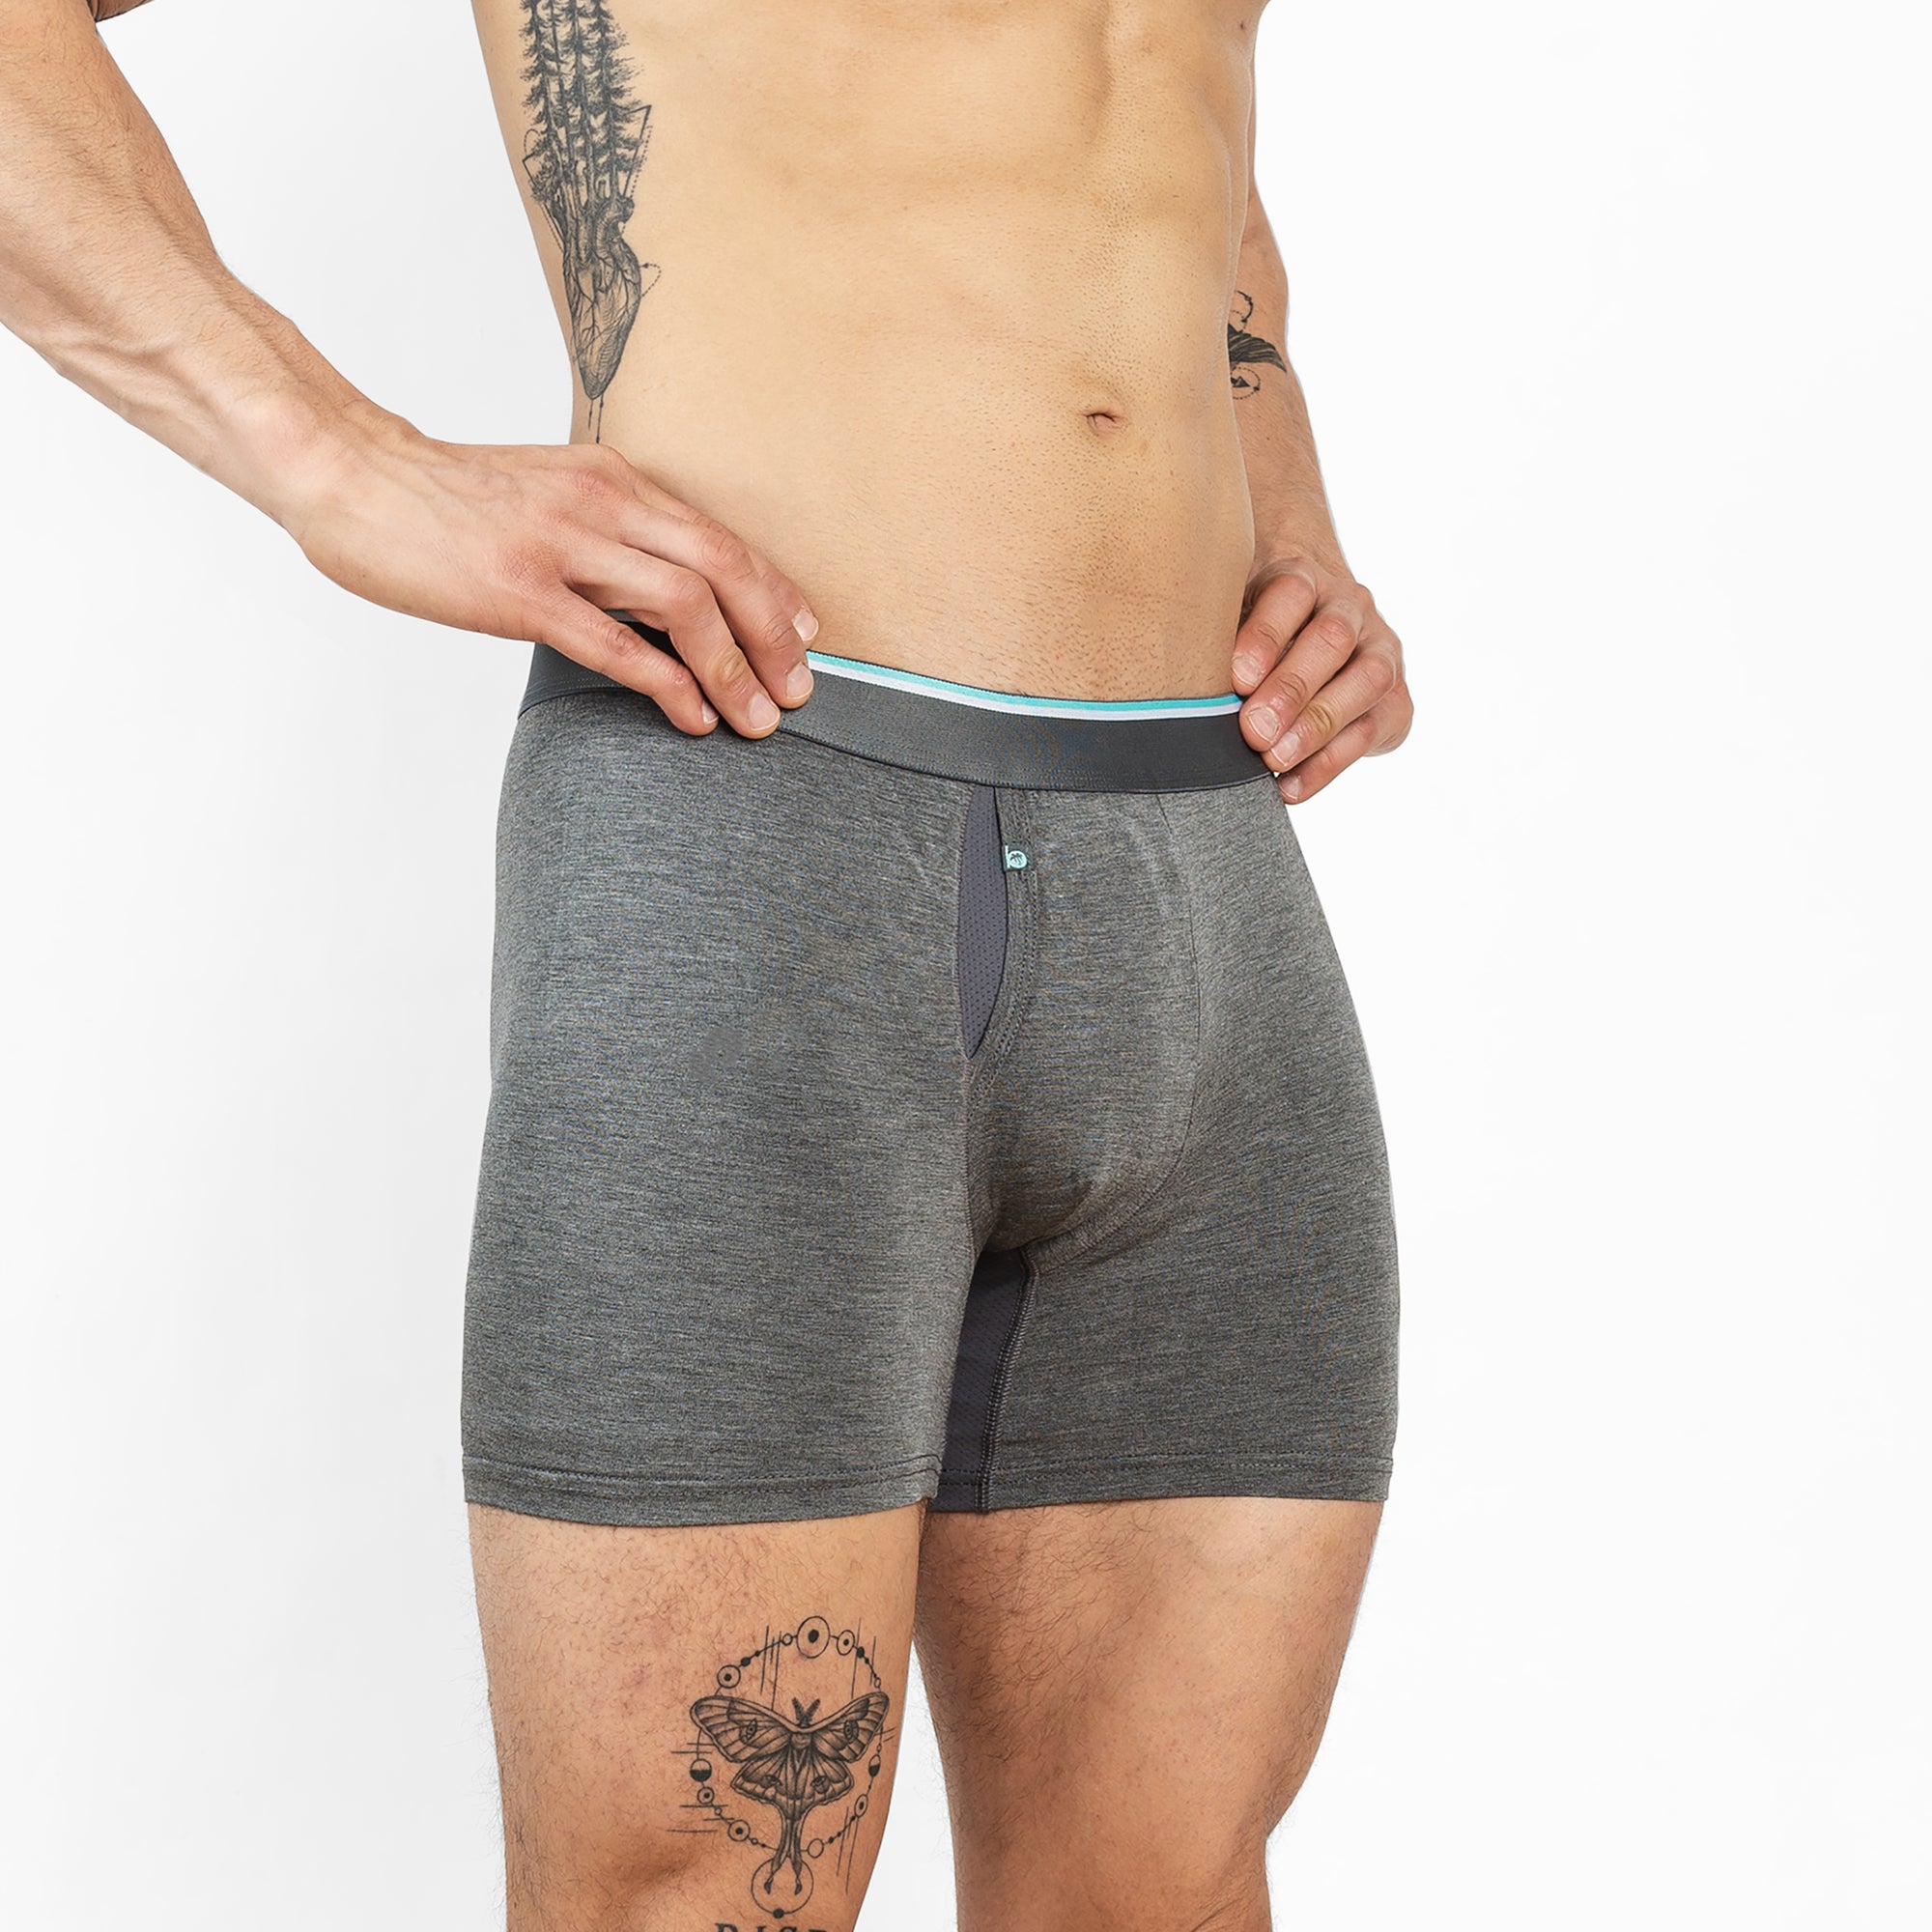 Heather Charcoal Performance Boxer Brief - Get Basic